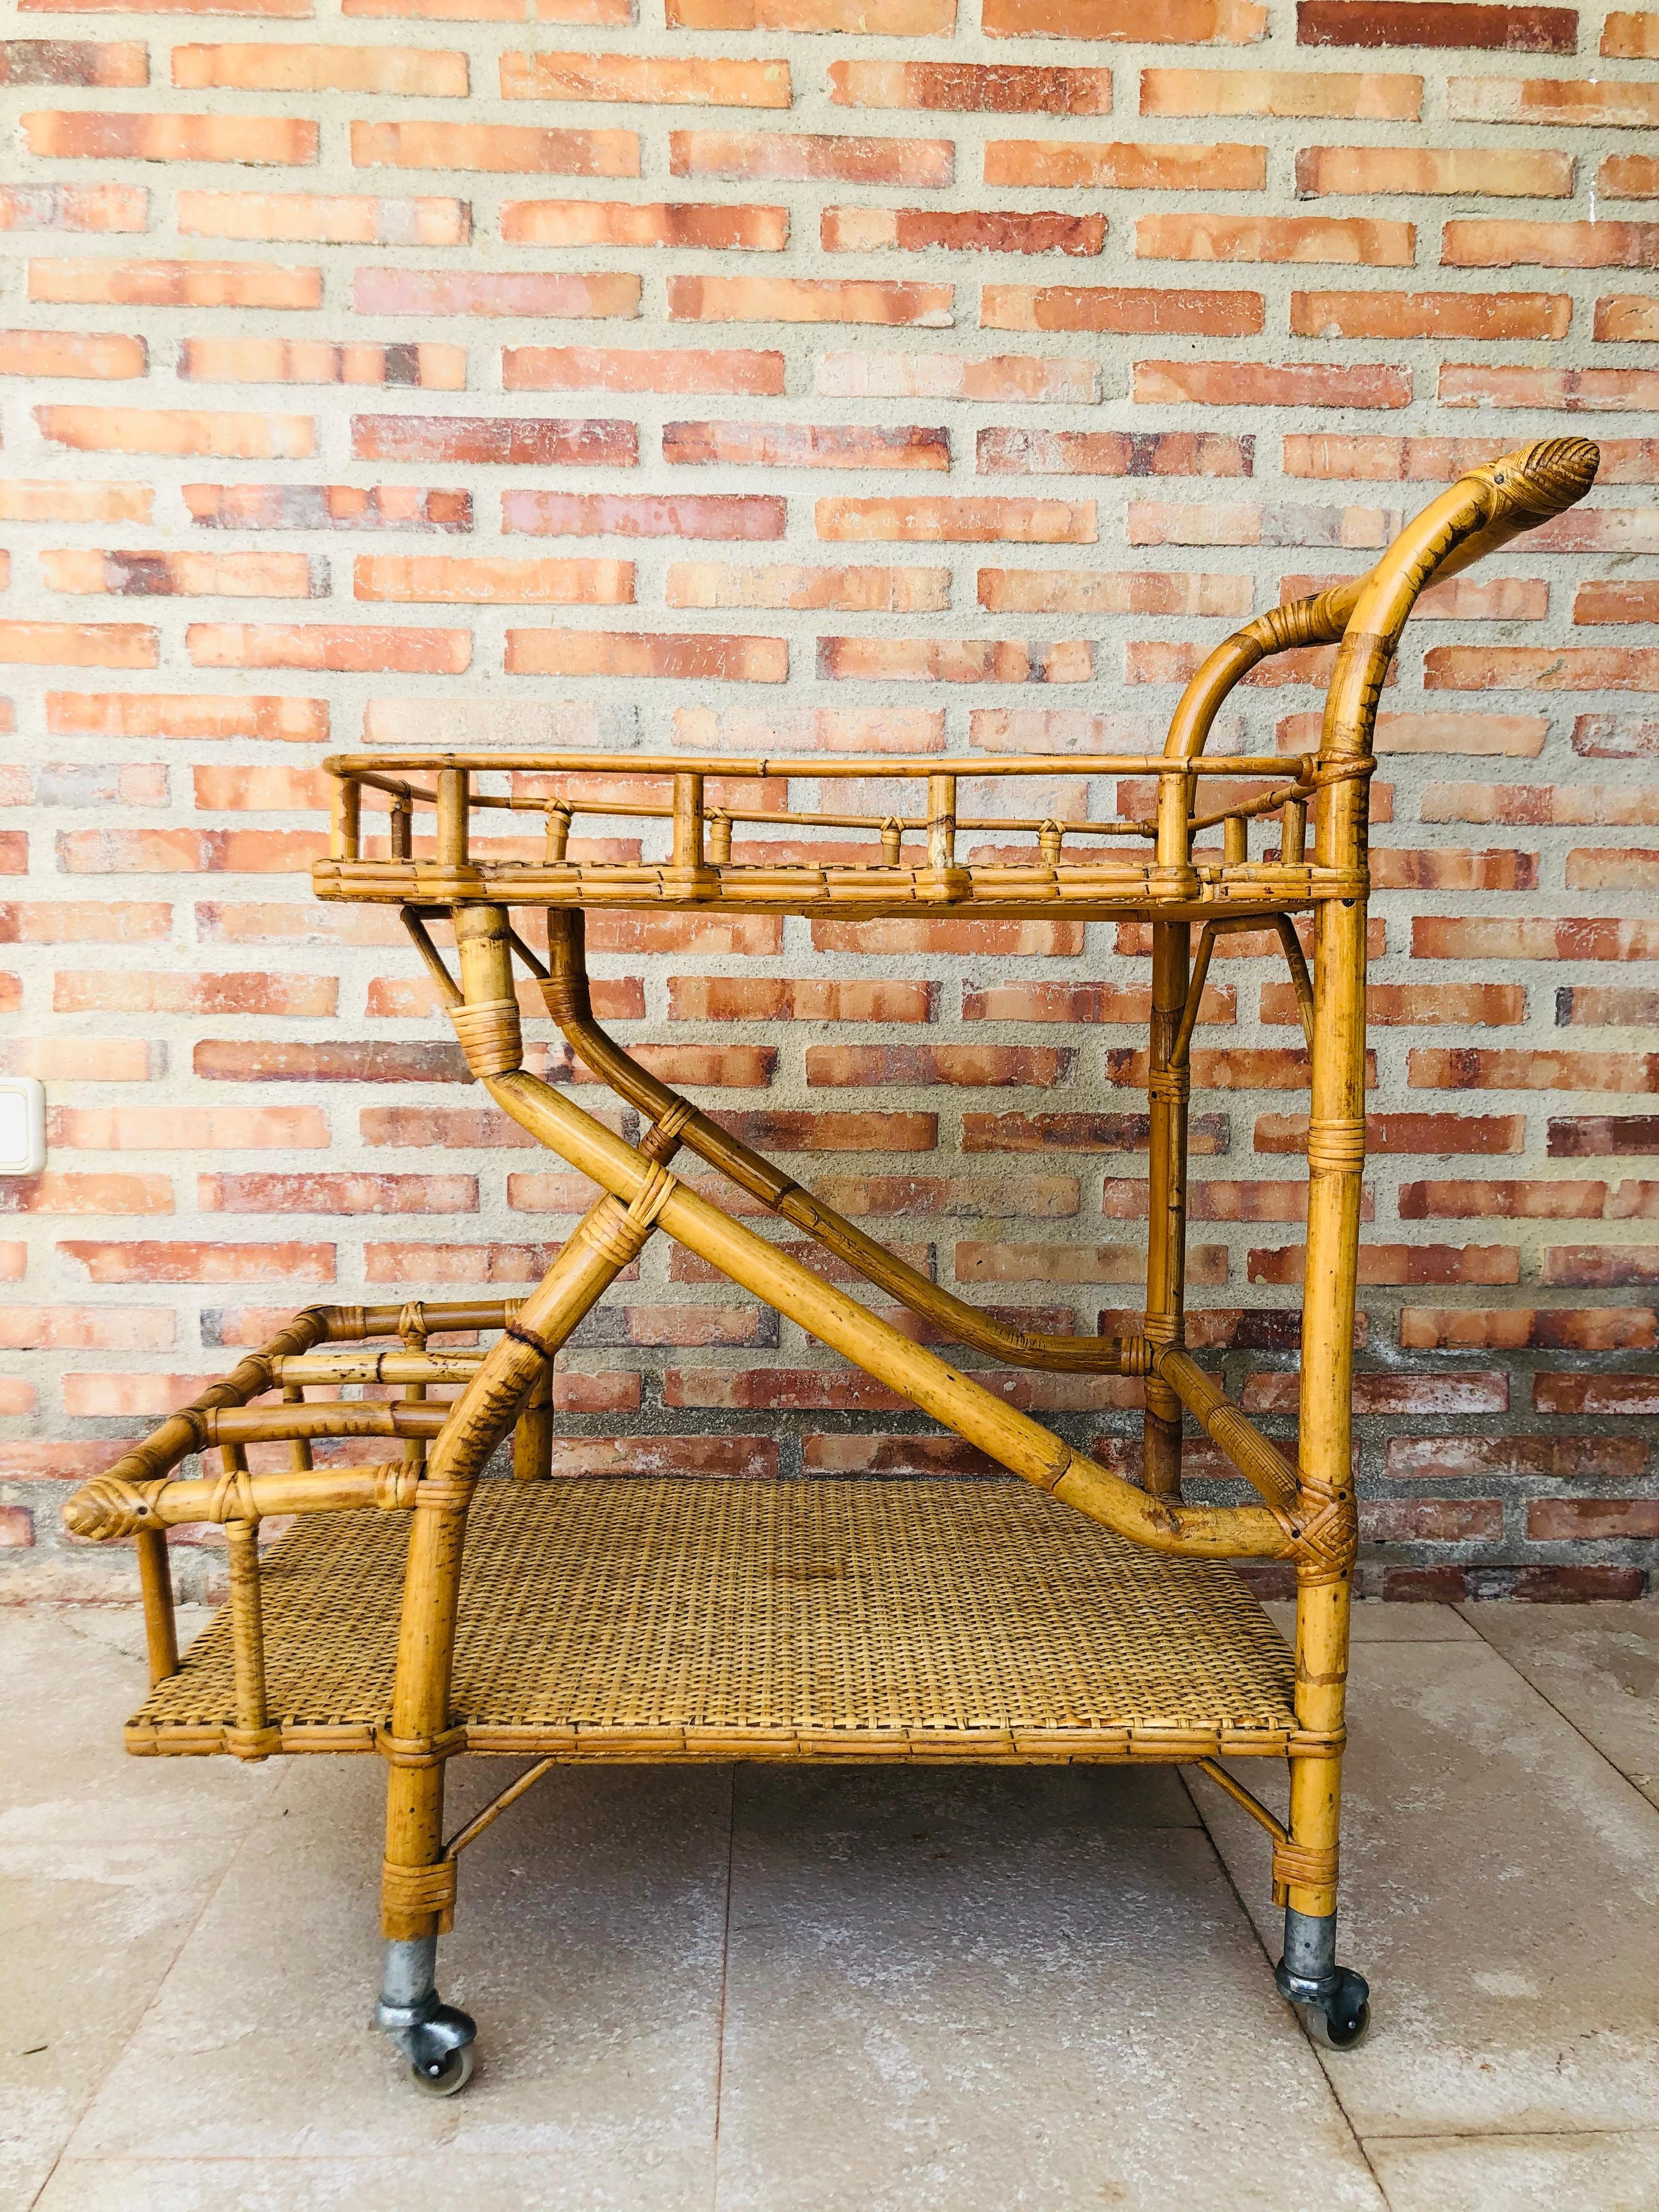 Mid-Century Modern bamboo tea cart. Garden furniture
Perfect for a collected garden of potted plants, or extra kitchen storage.